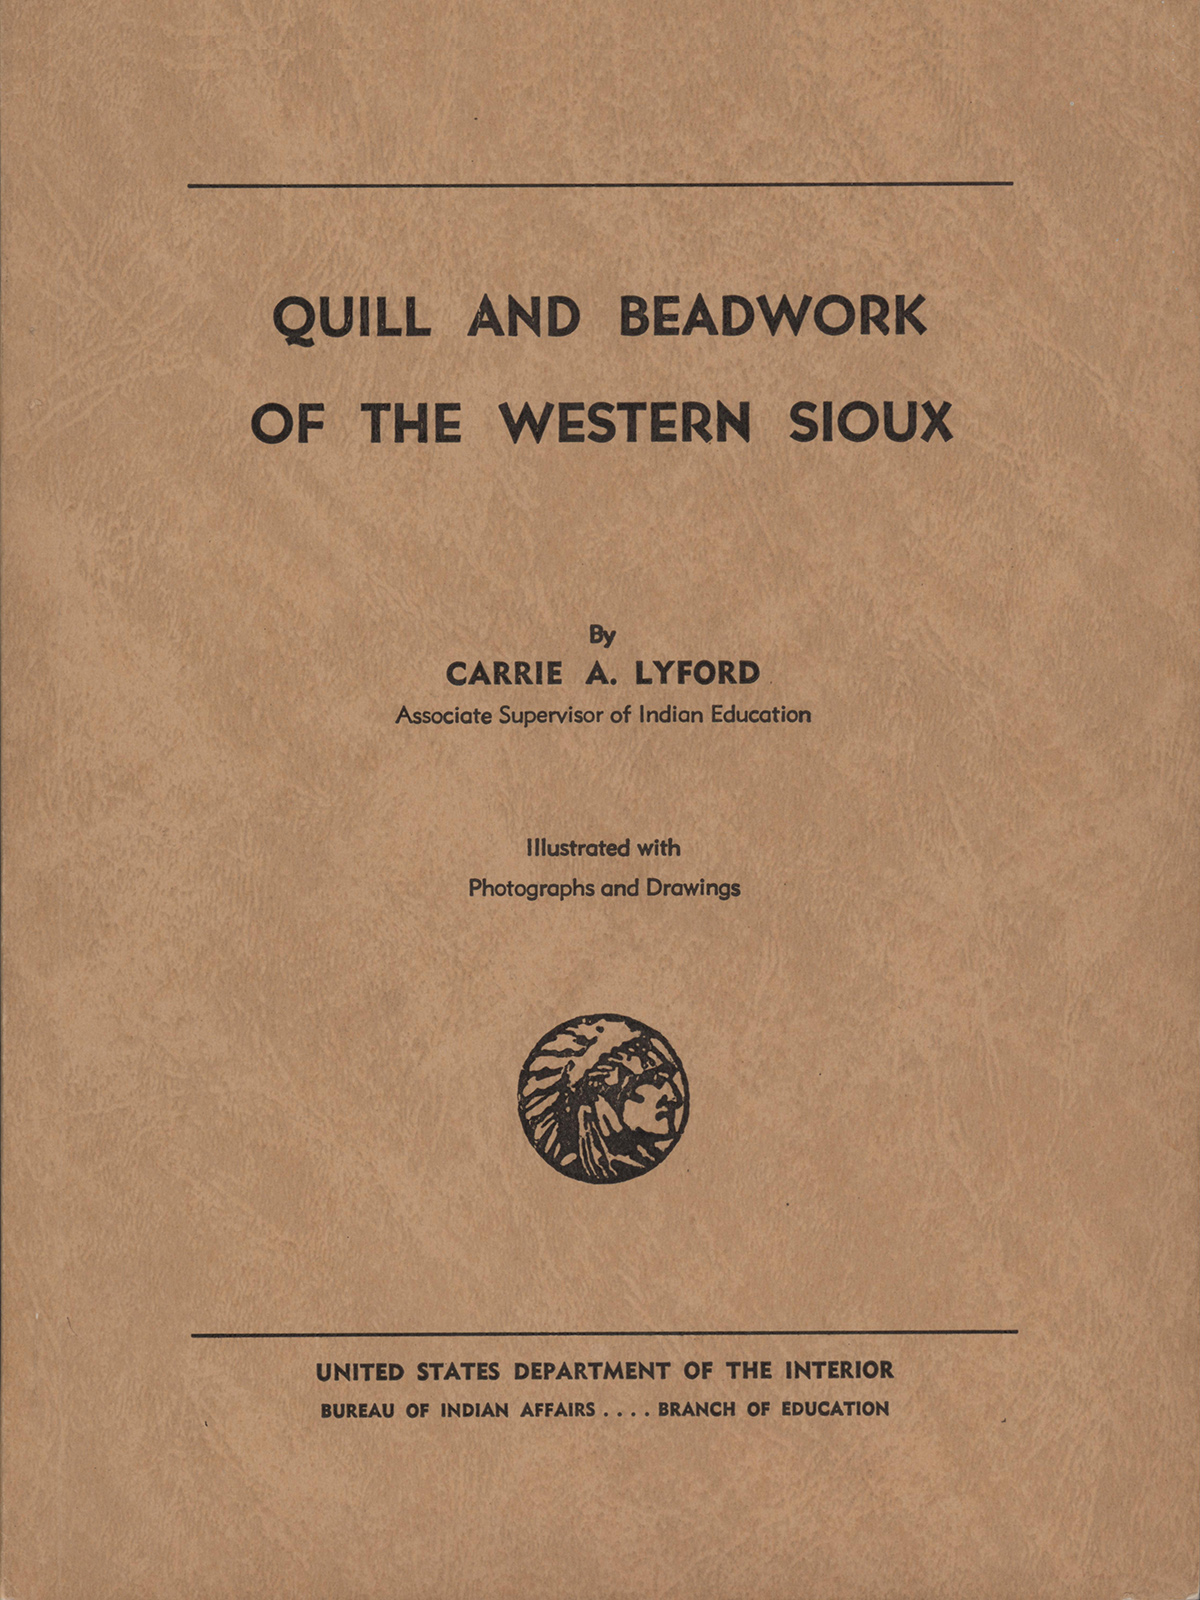 Lyford, Carrie A. - Quill and Beadwork of the Western Sioux